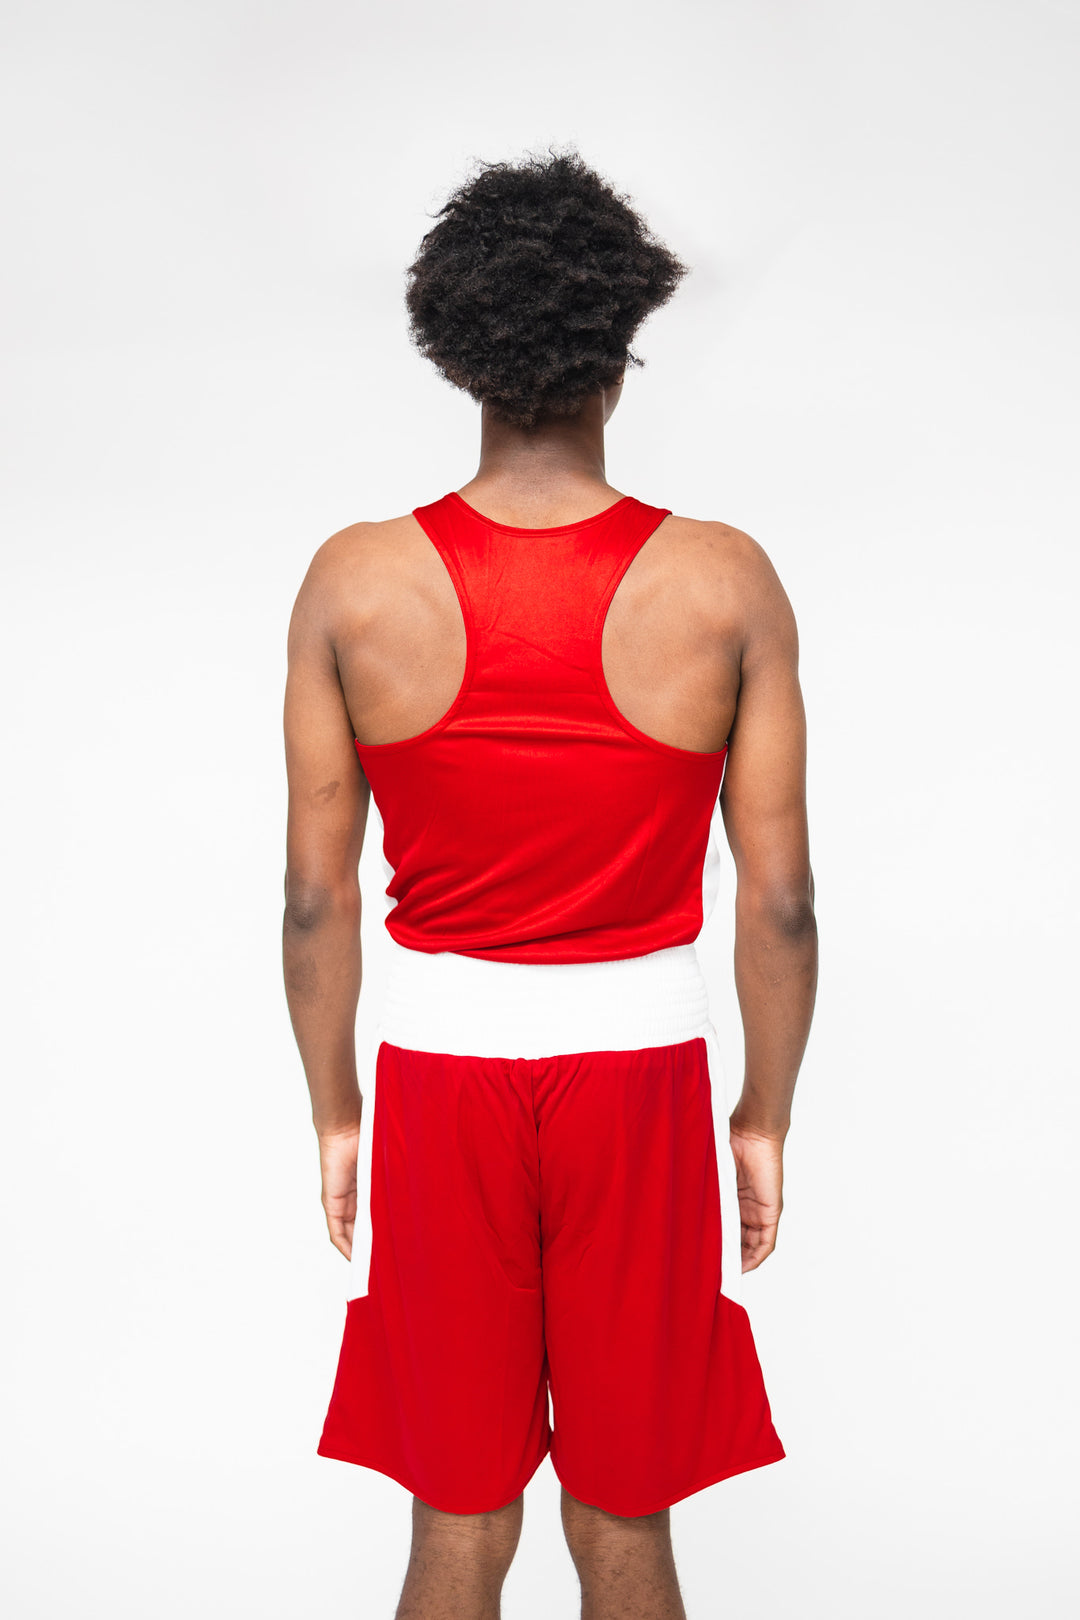 Amateur Boxing TANK - RED